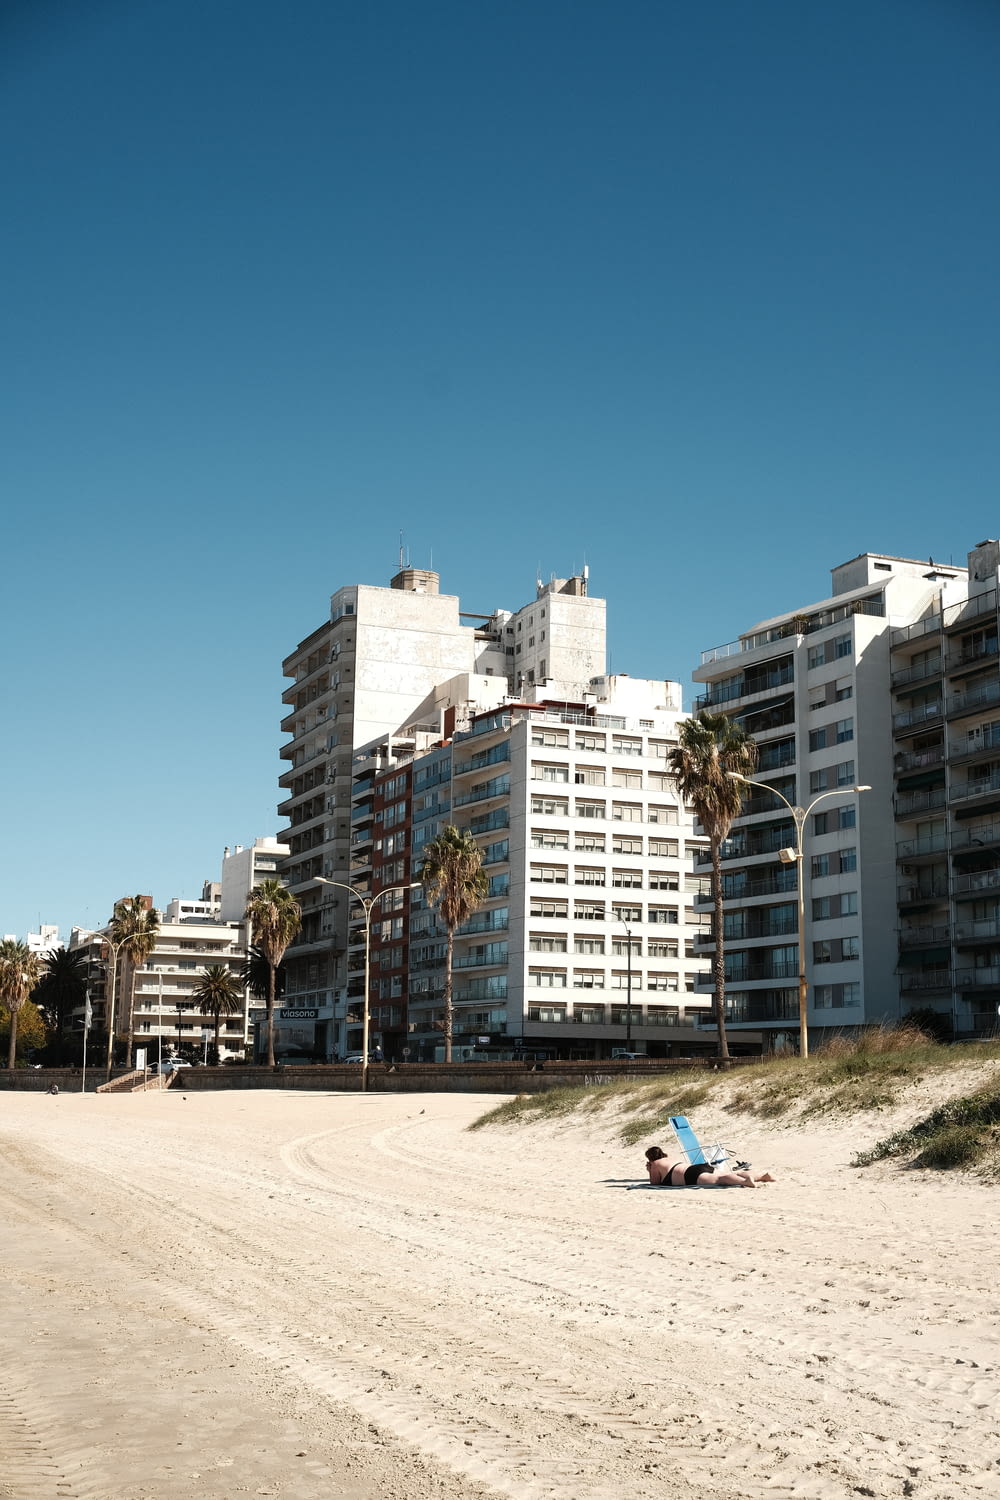 a beach scene with a building in the background